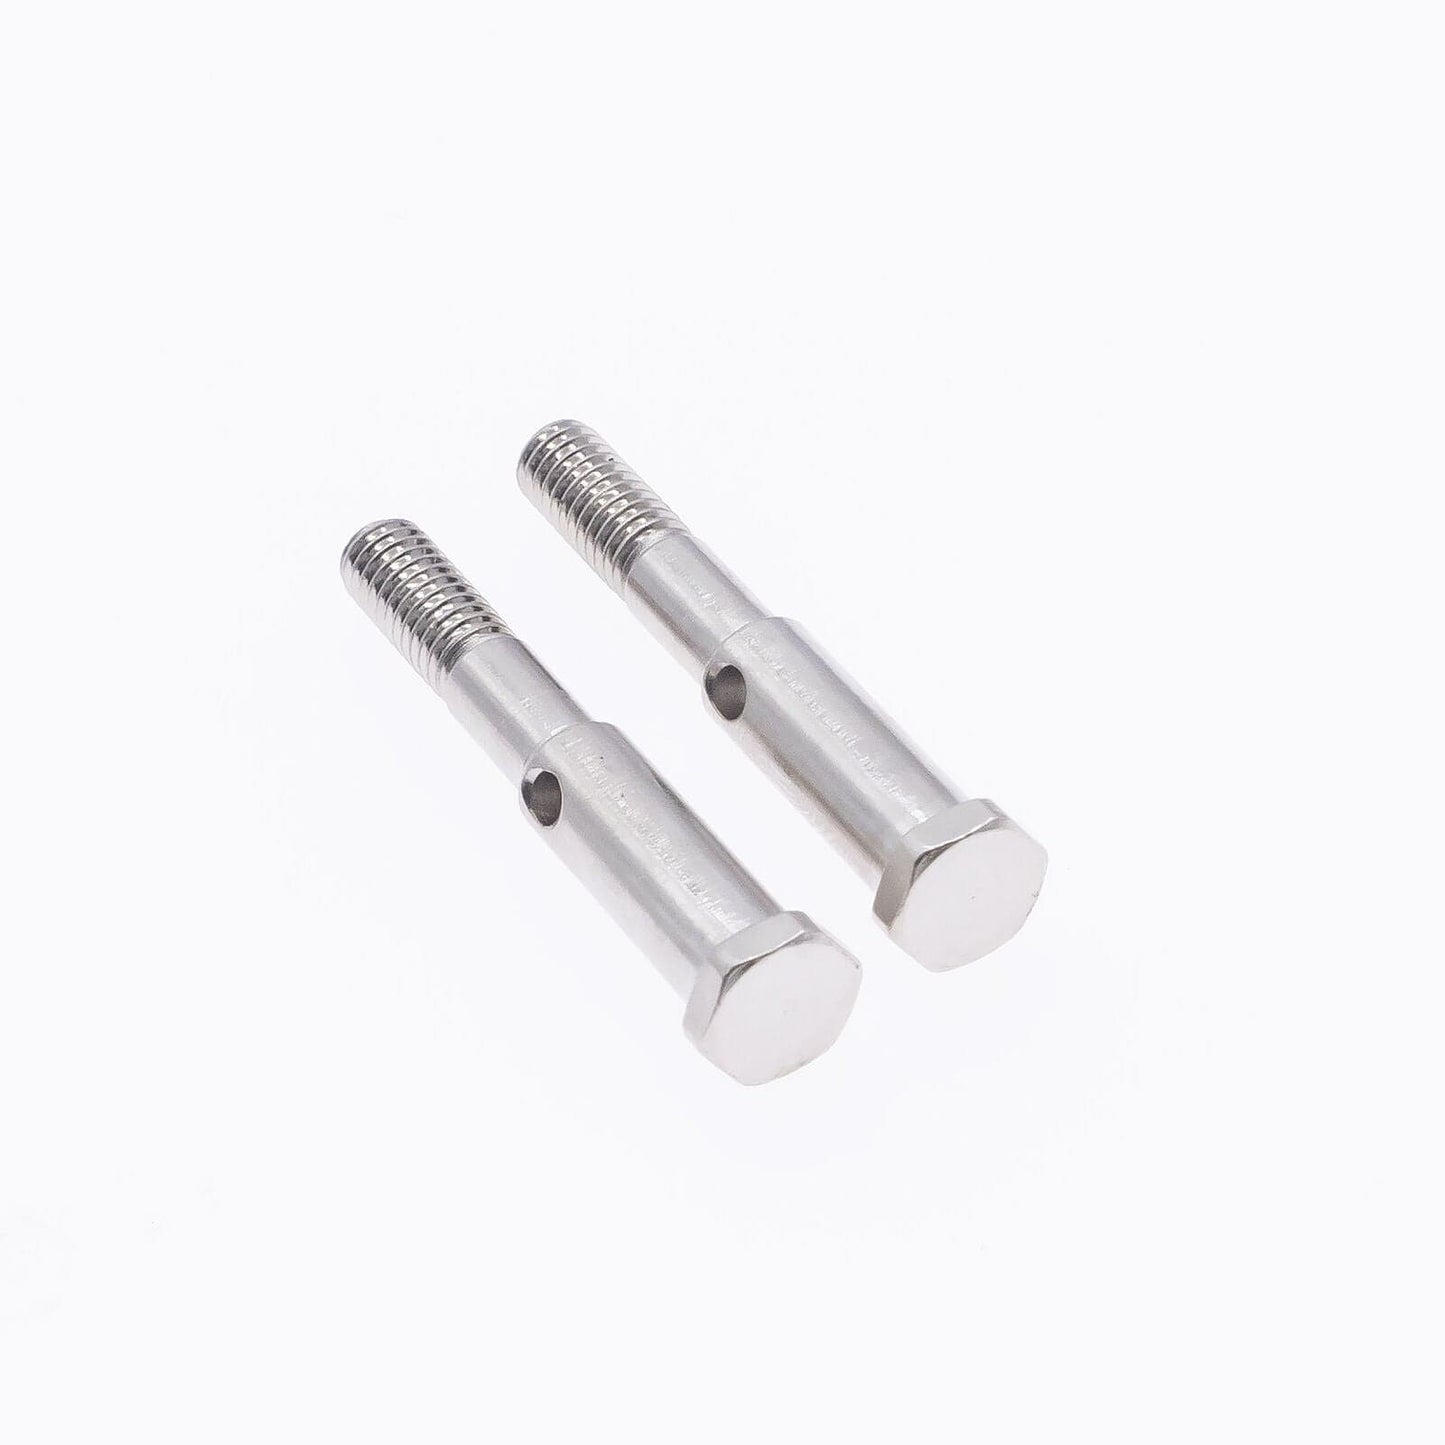 RCAWD Front Axle Shaft ECX1035 For RC Hobby Car 1 - 10 ECX 2WD Series Hop - ups 2pcs - RCAWD